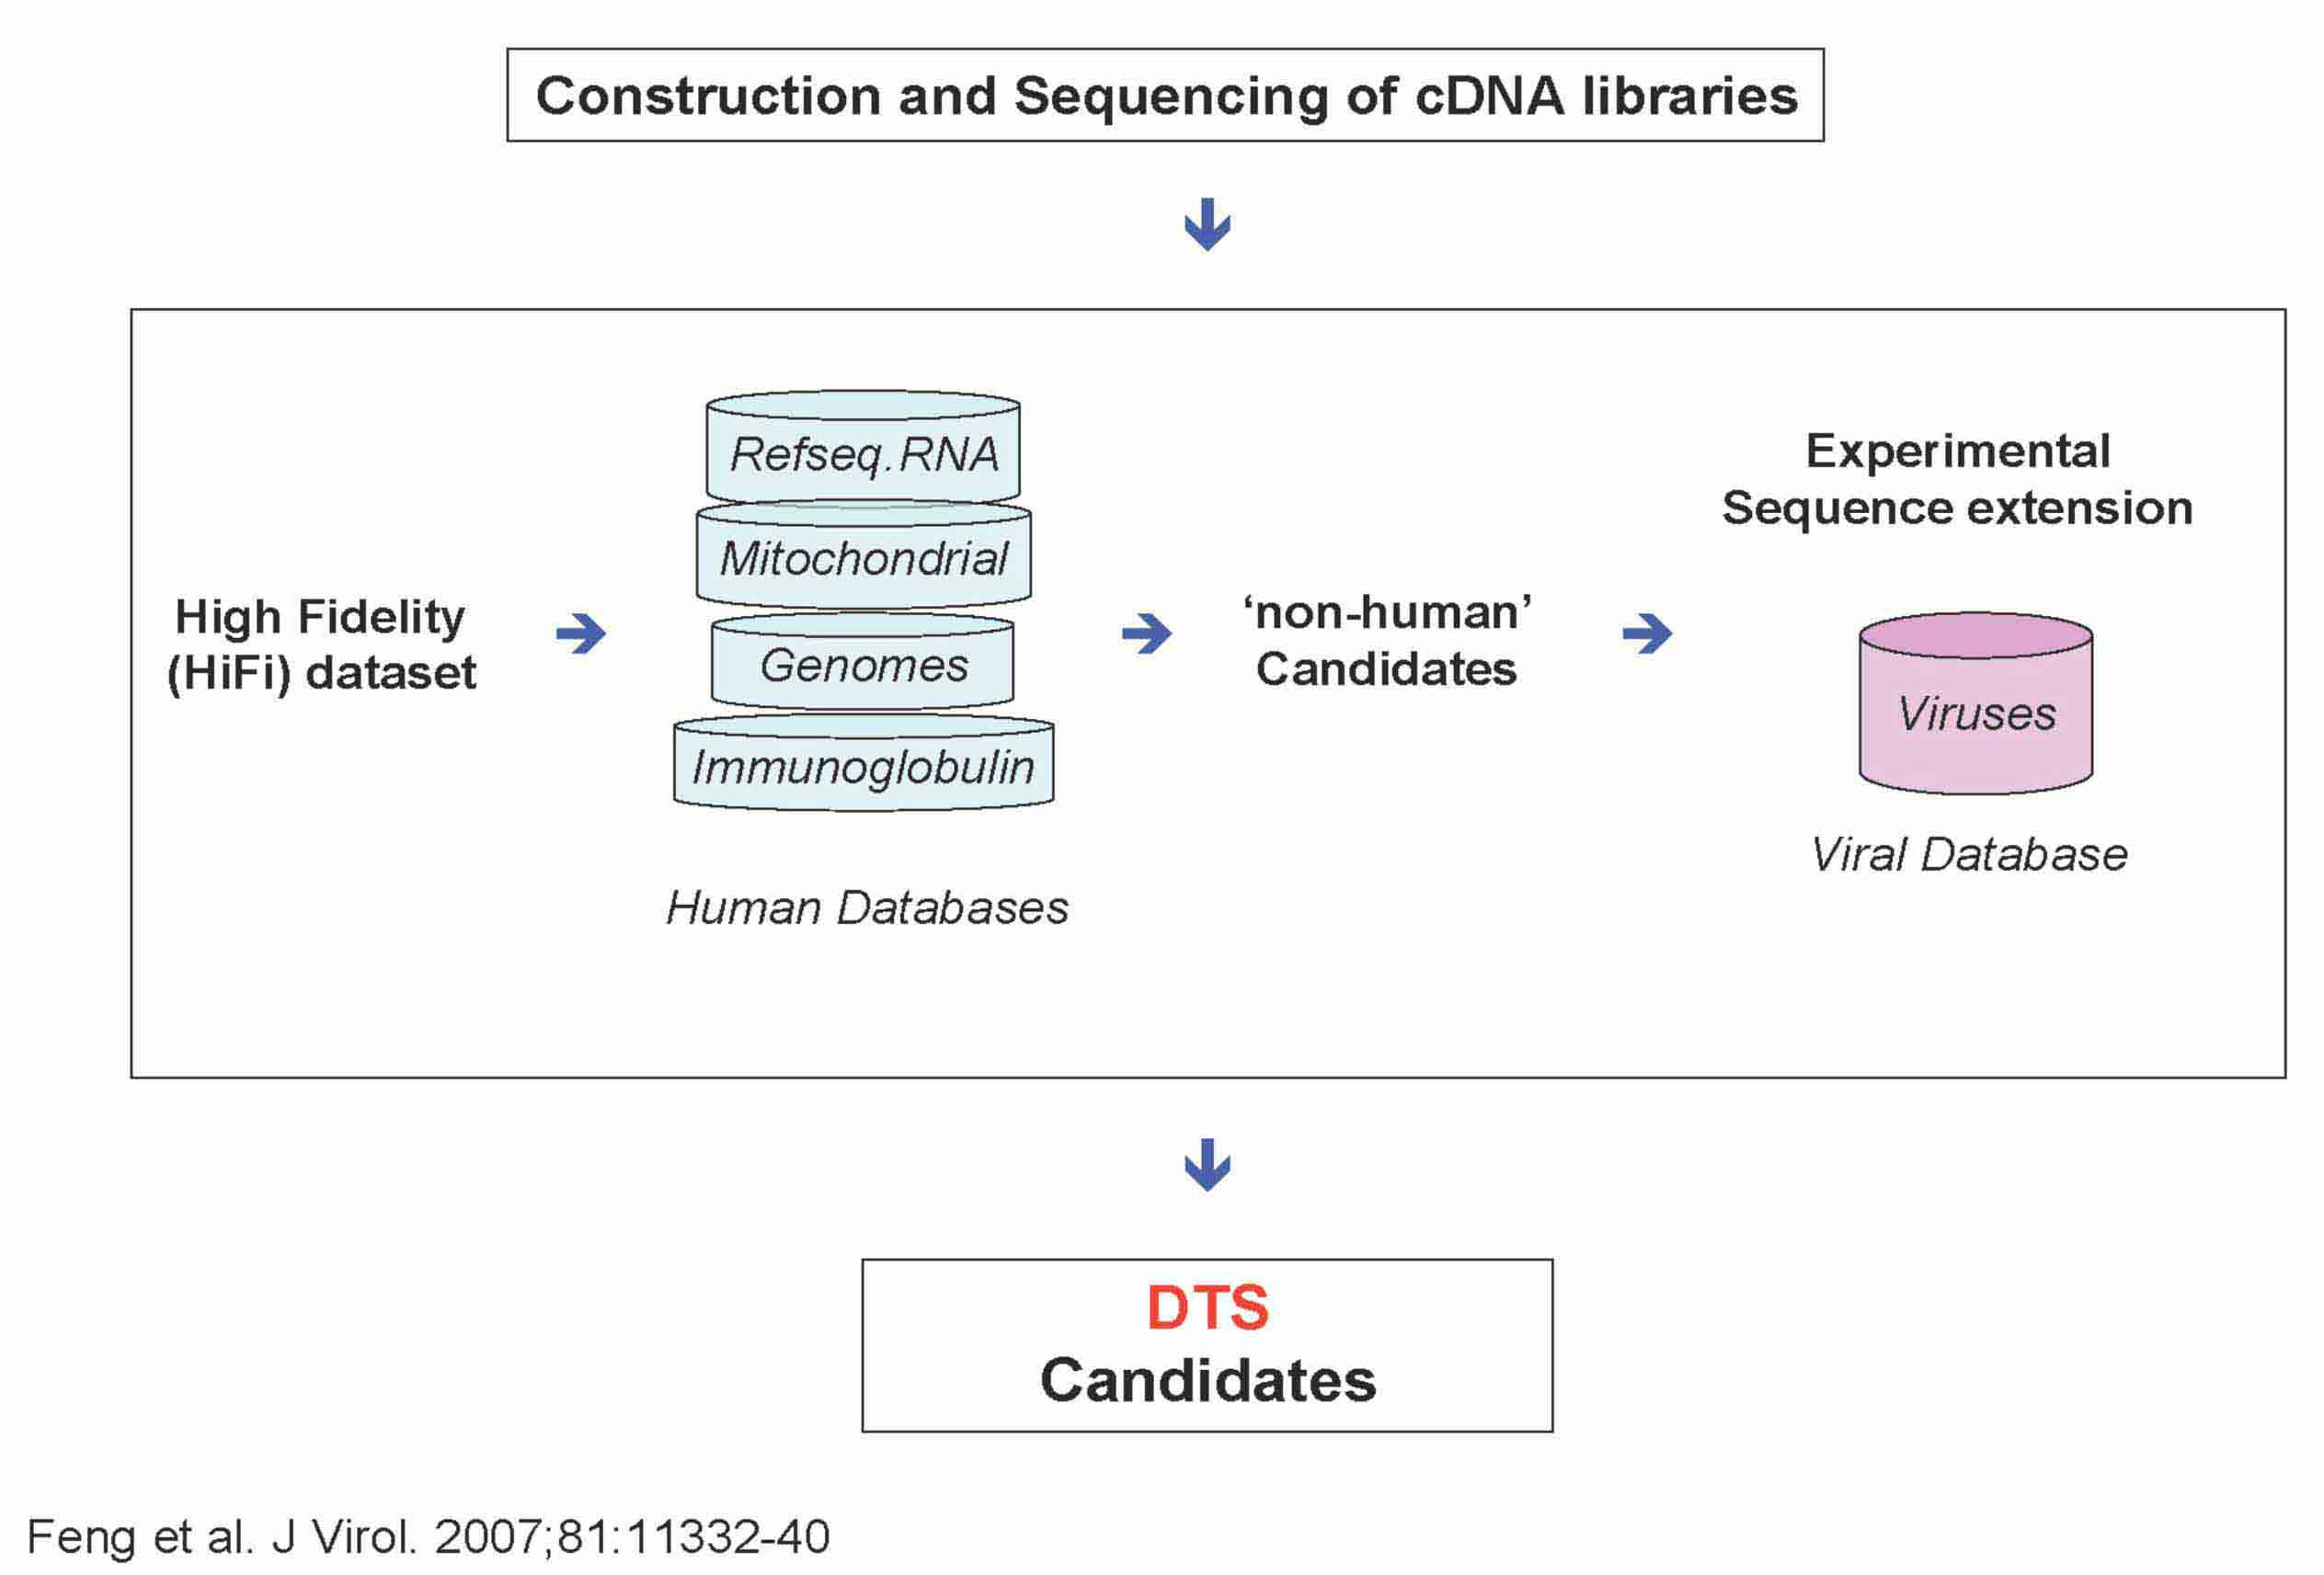 Construction and Sequencing of cDNA Libraries